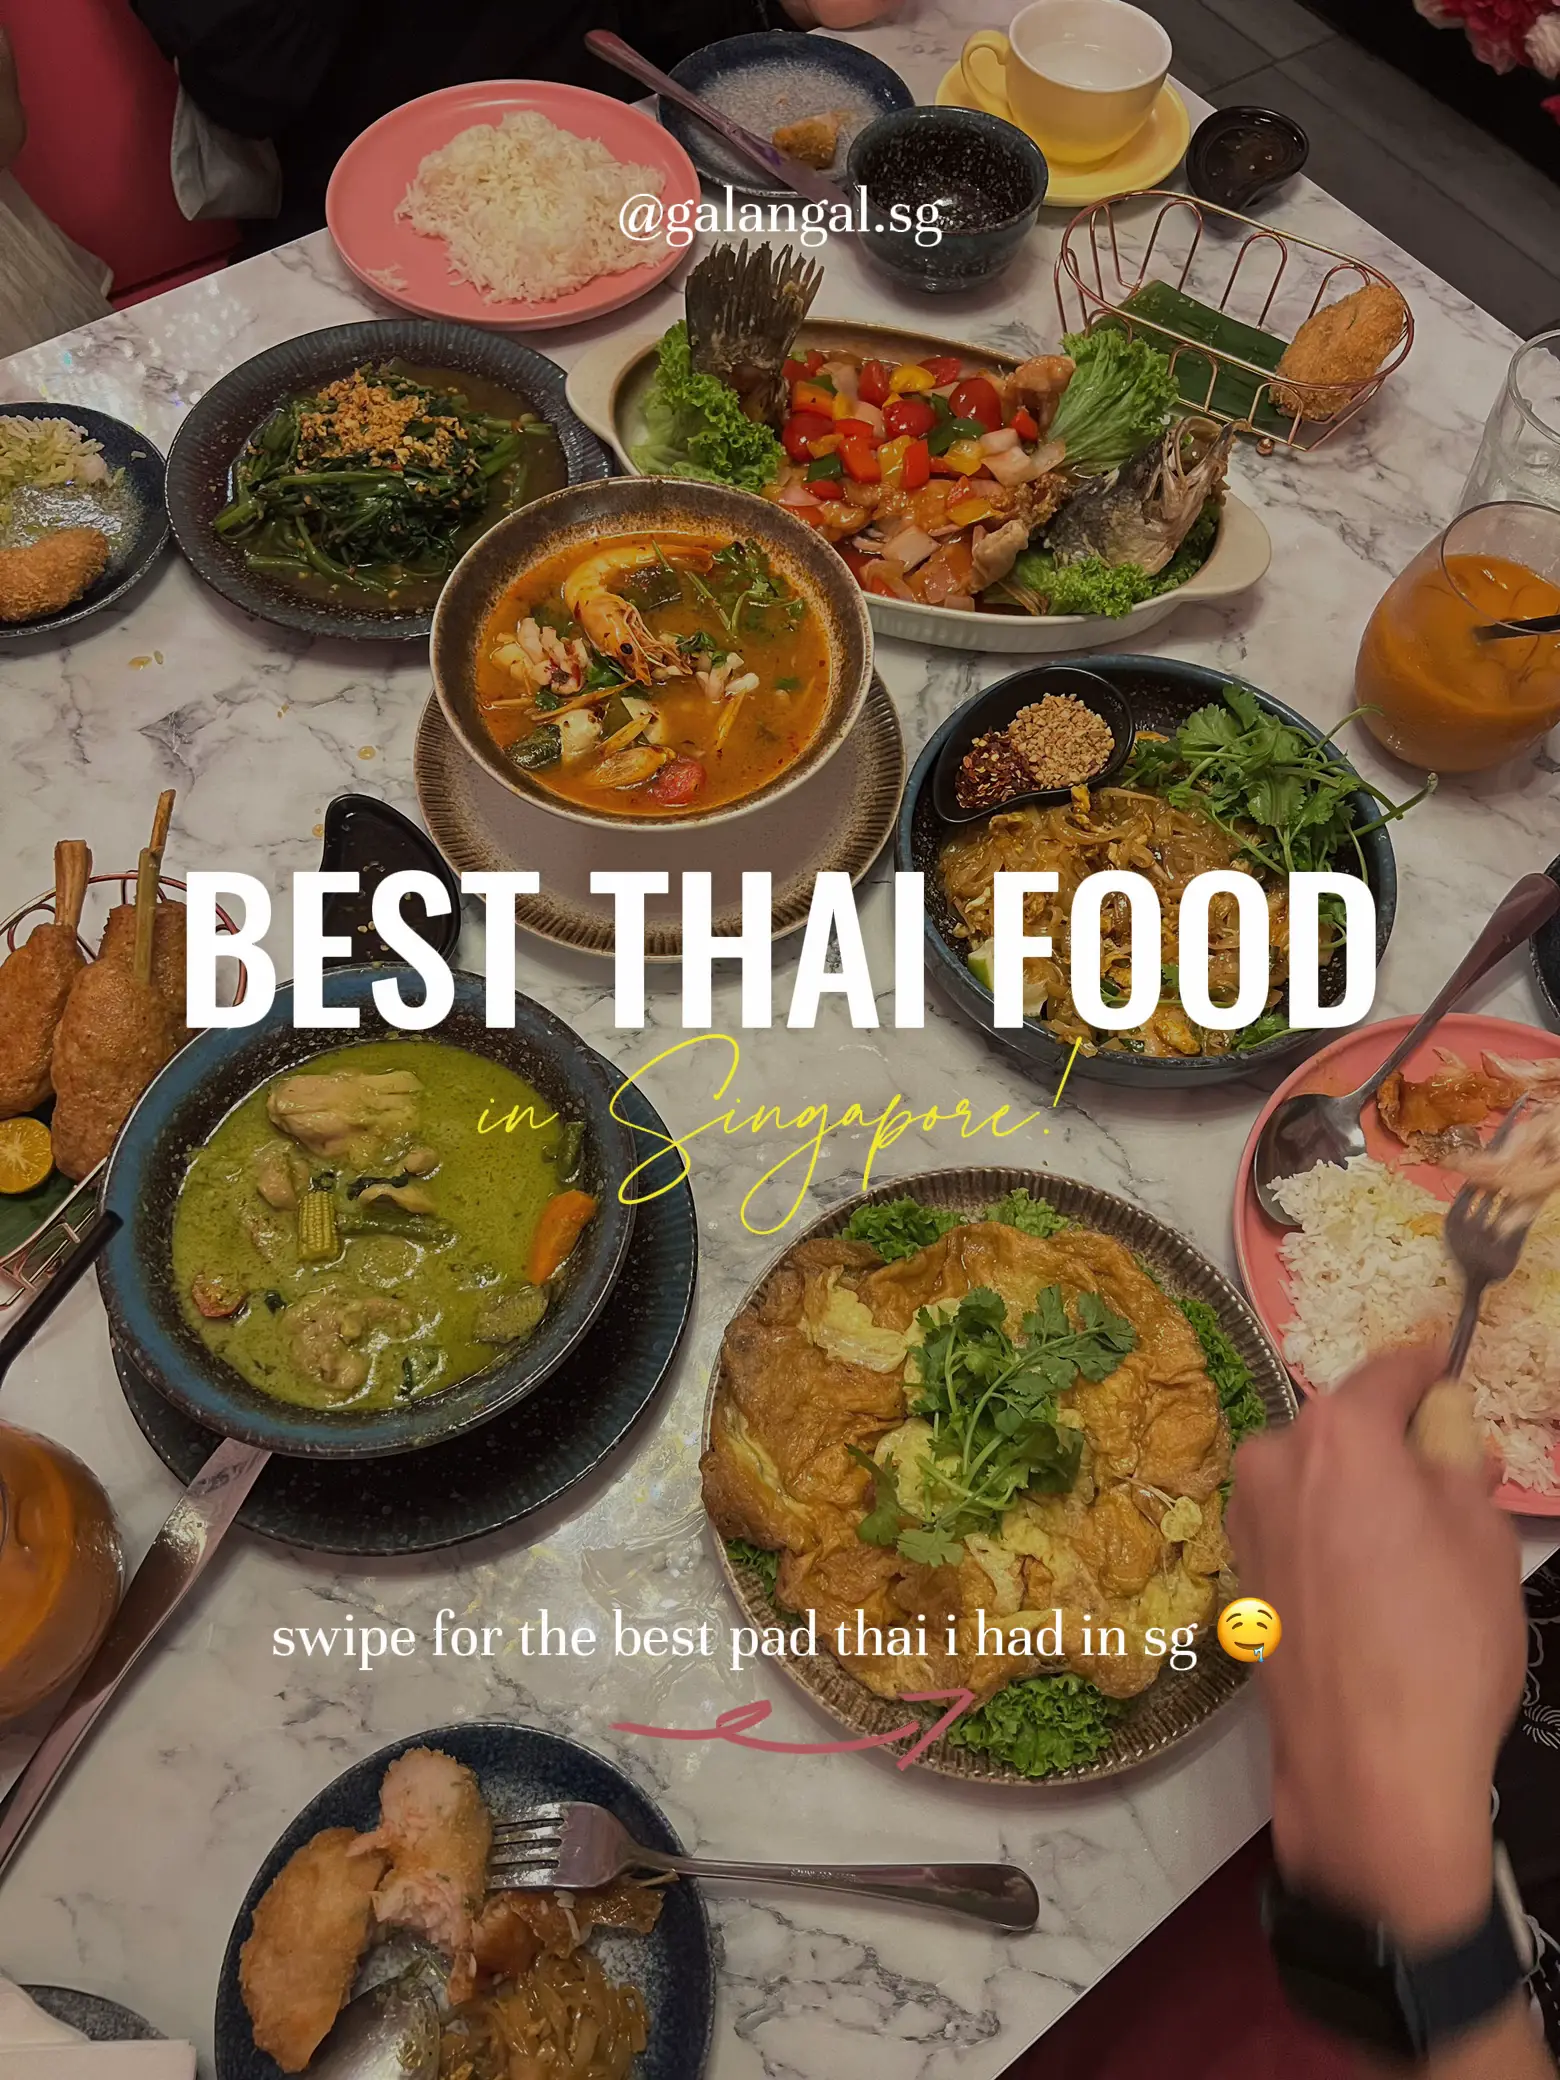 THIS PLACE IS APPROVED BY MY THAI FAMILY 😌🤤's images(0)